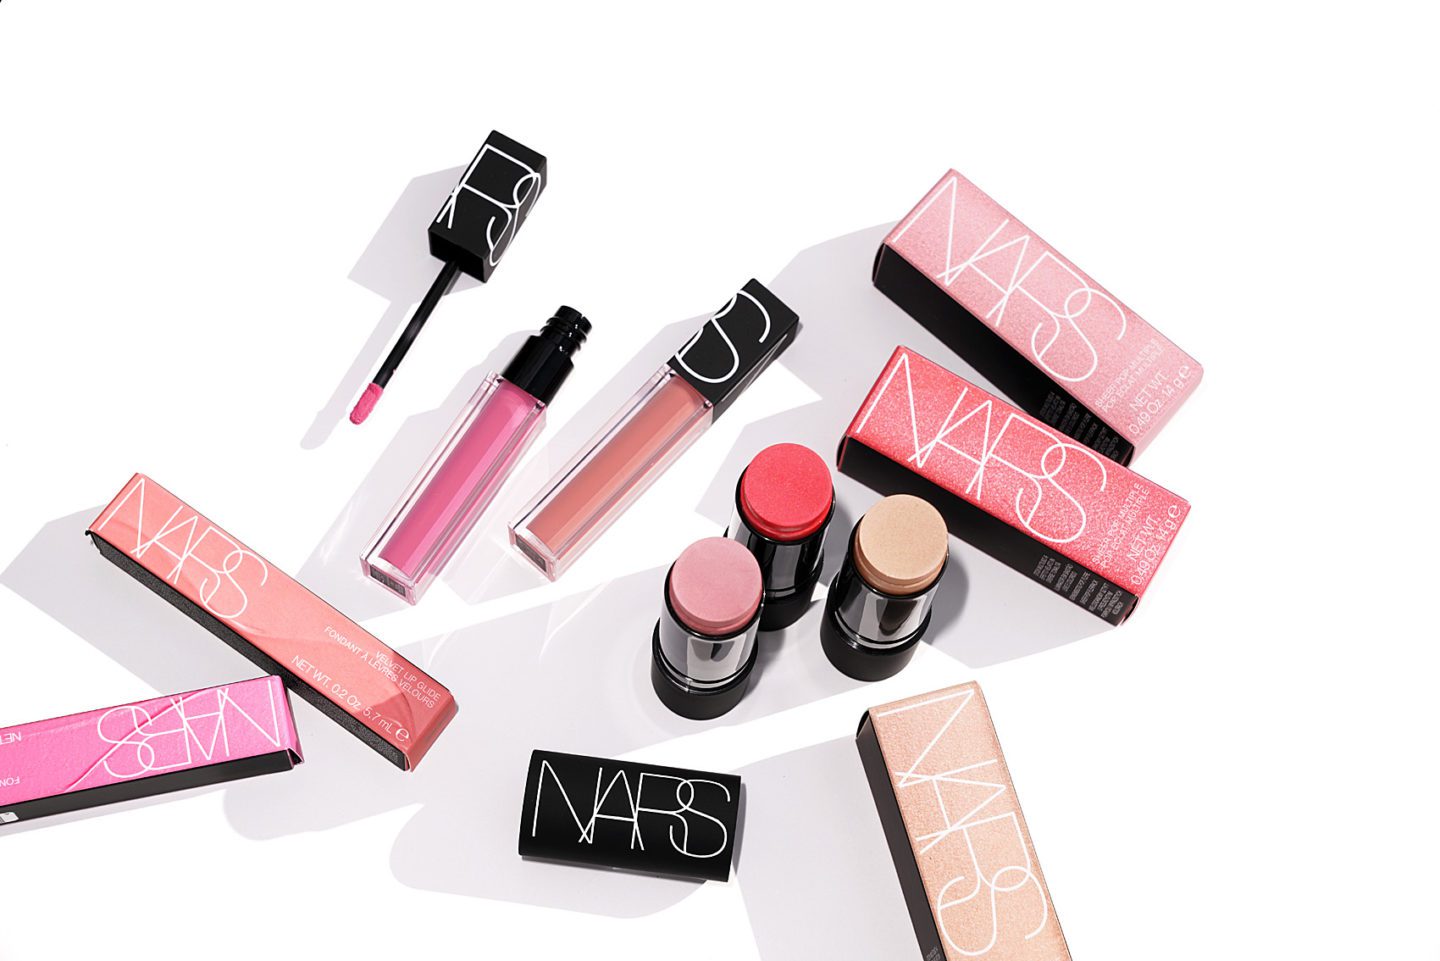 NARS Pop Goes the Easel Nordstrom Picks | The Beauty Look Book